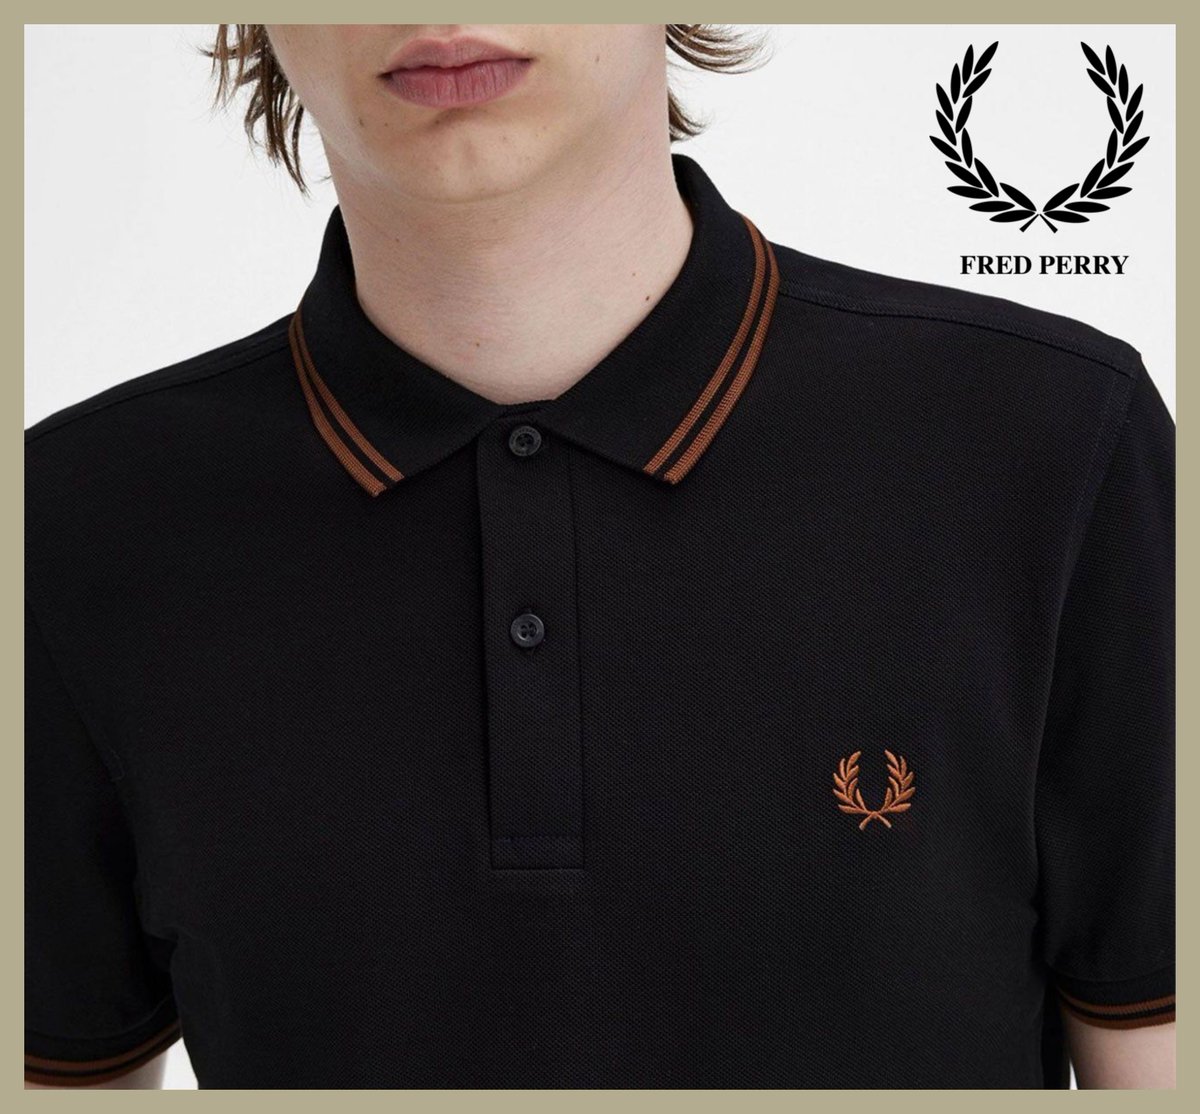 Ad : New Season Fred Perry Reductions 20% Saving already applied + FREE Delivery and an extra 5% off (using code: EXTRA5) on orders over £100. Online here🔗tidd.ly/3UPPDBE